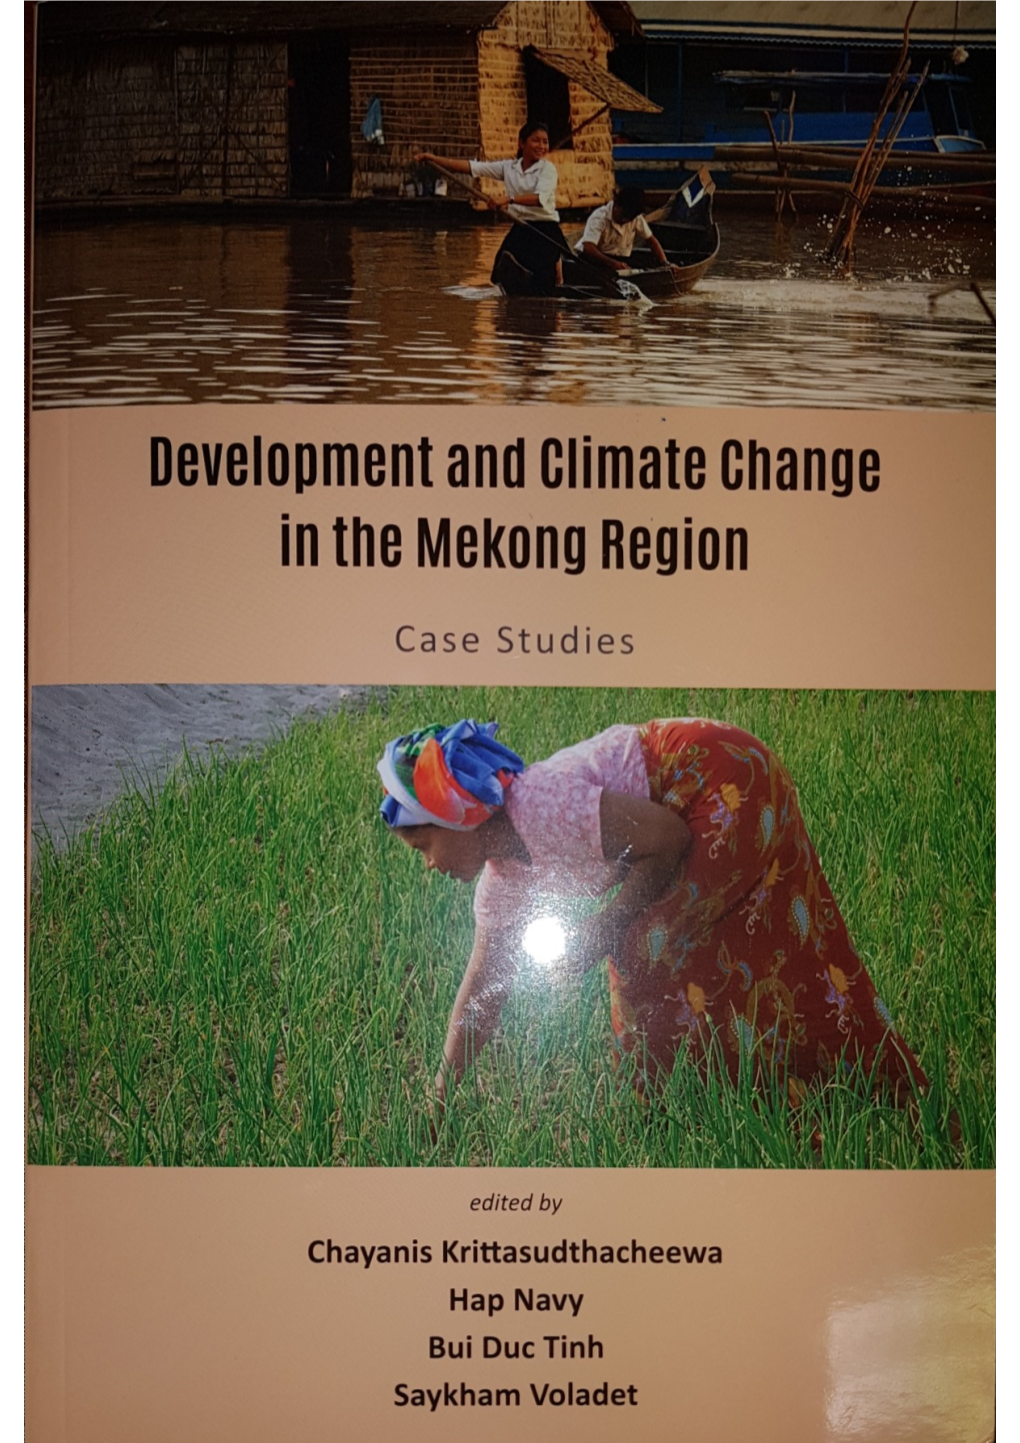 Development and Climate Change in the Mekong Region